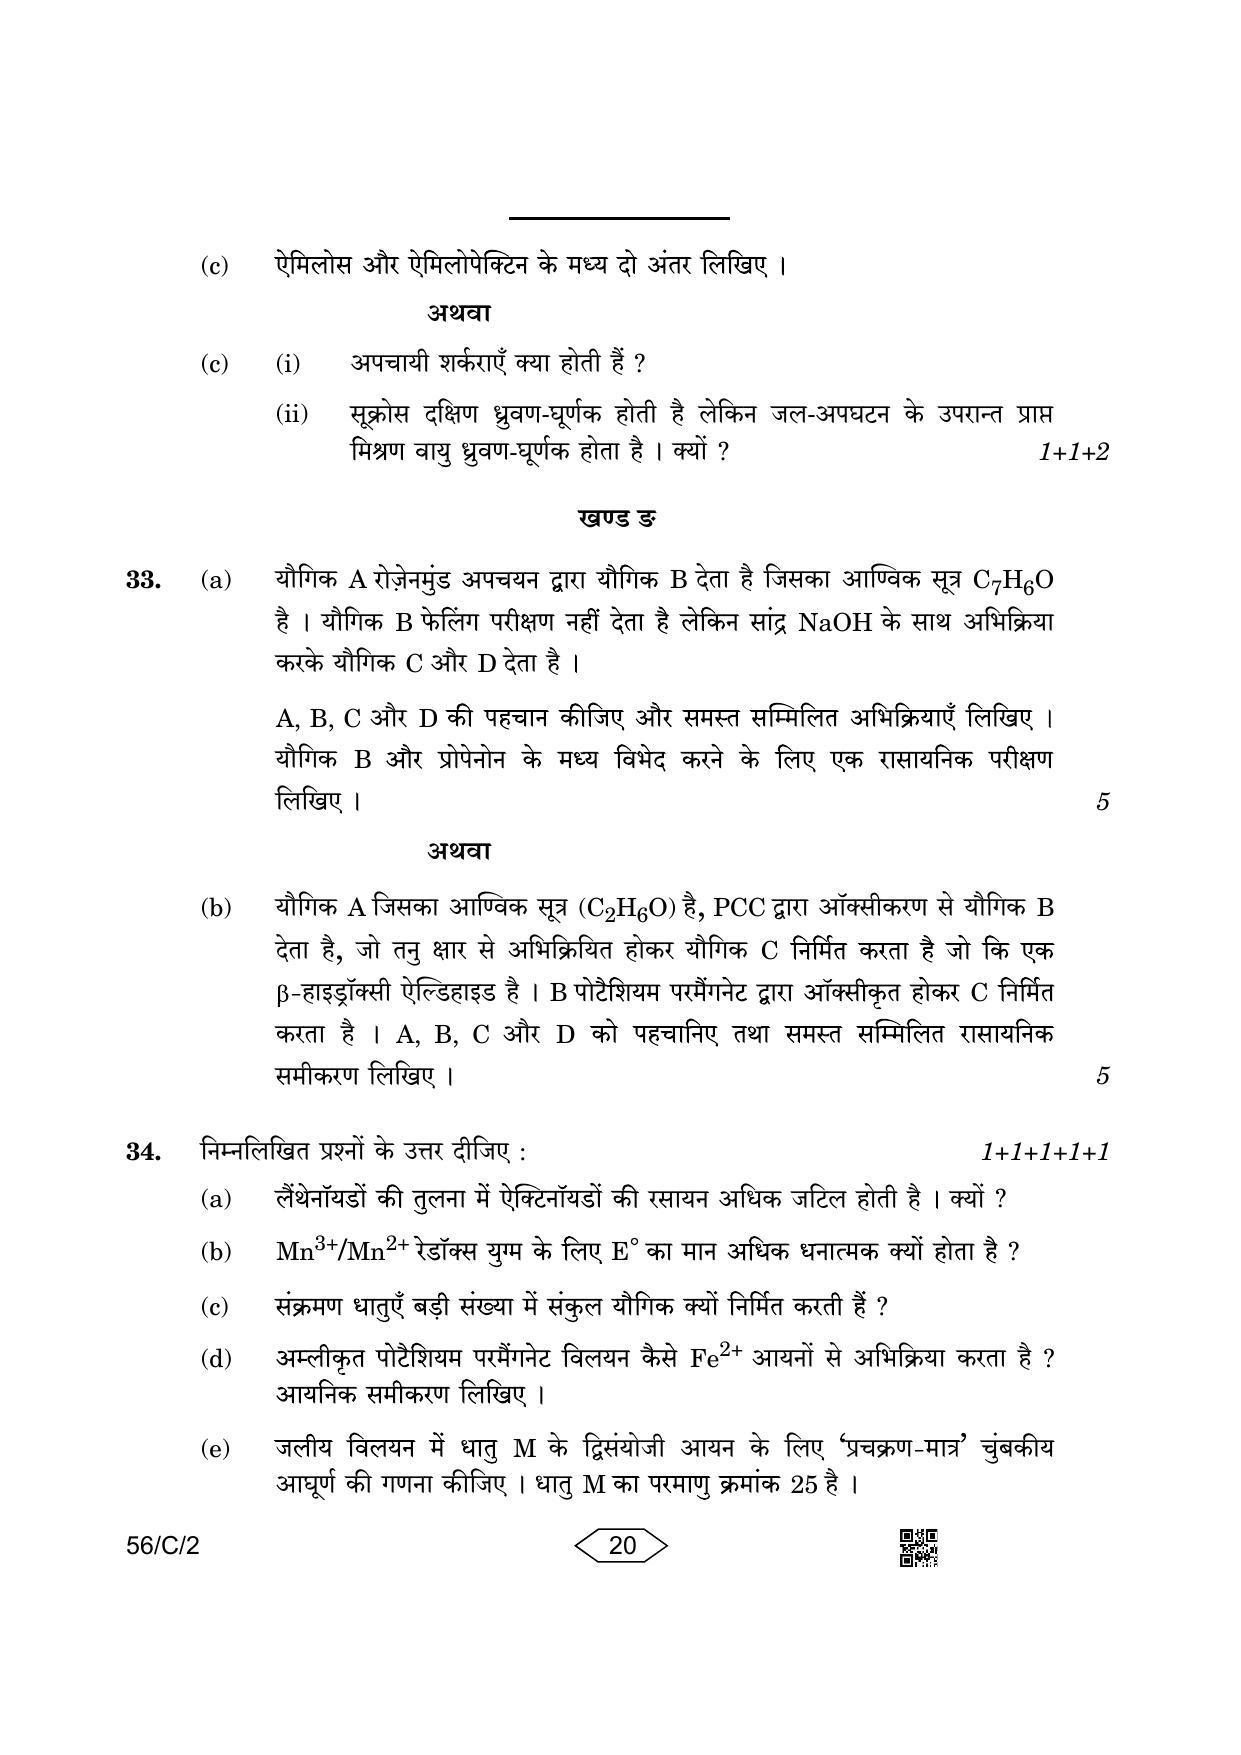 CBSE Class 12 56-2 Chemistry 2023 (Compartment) Question Paper - Page 20